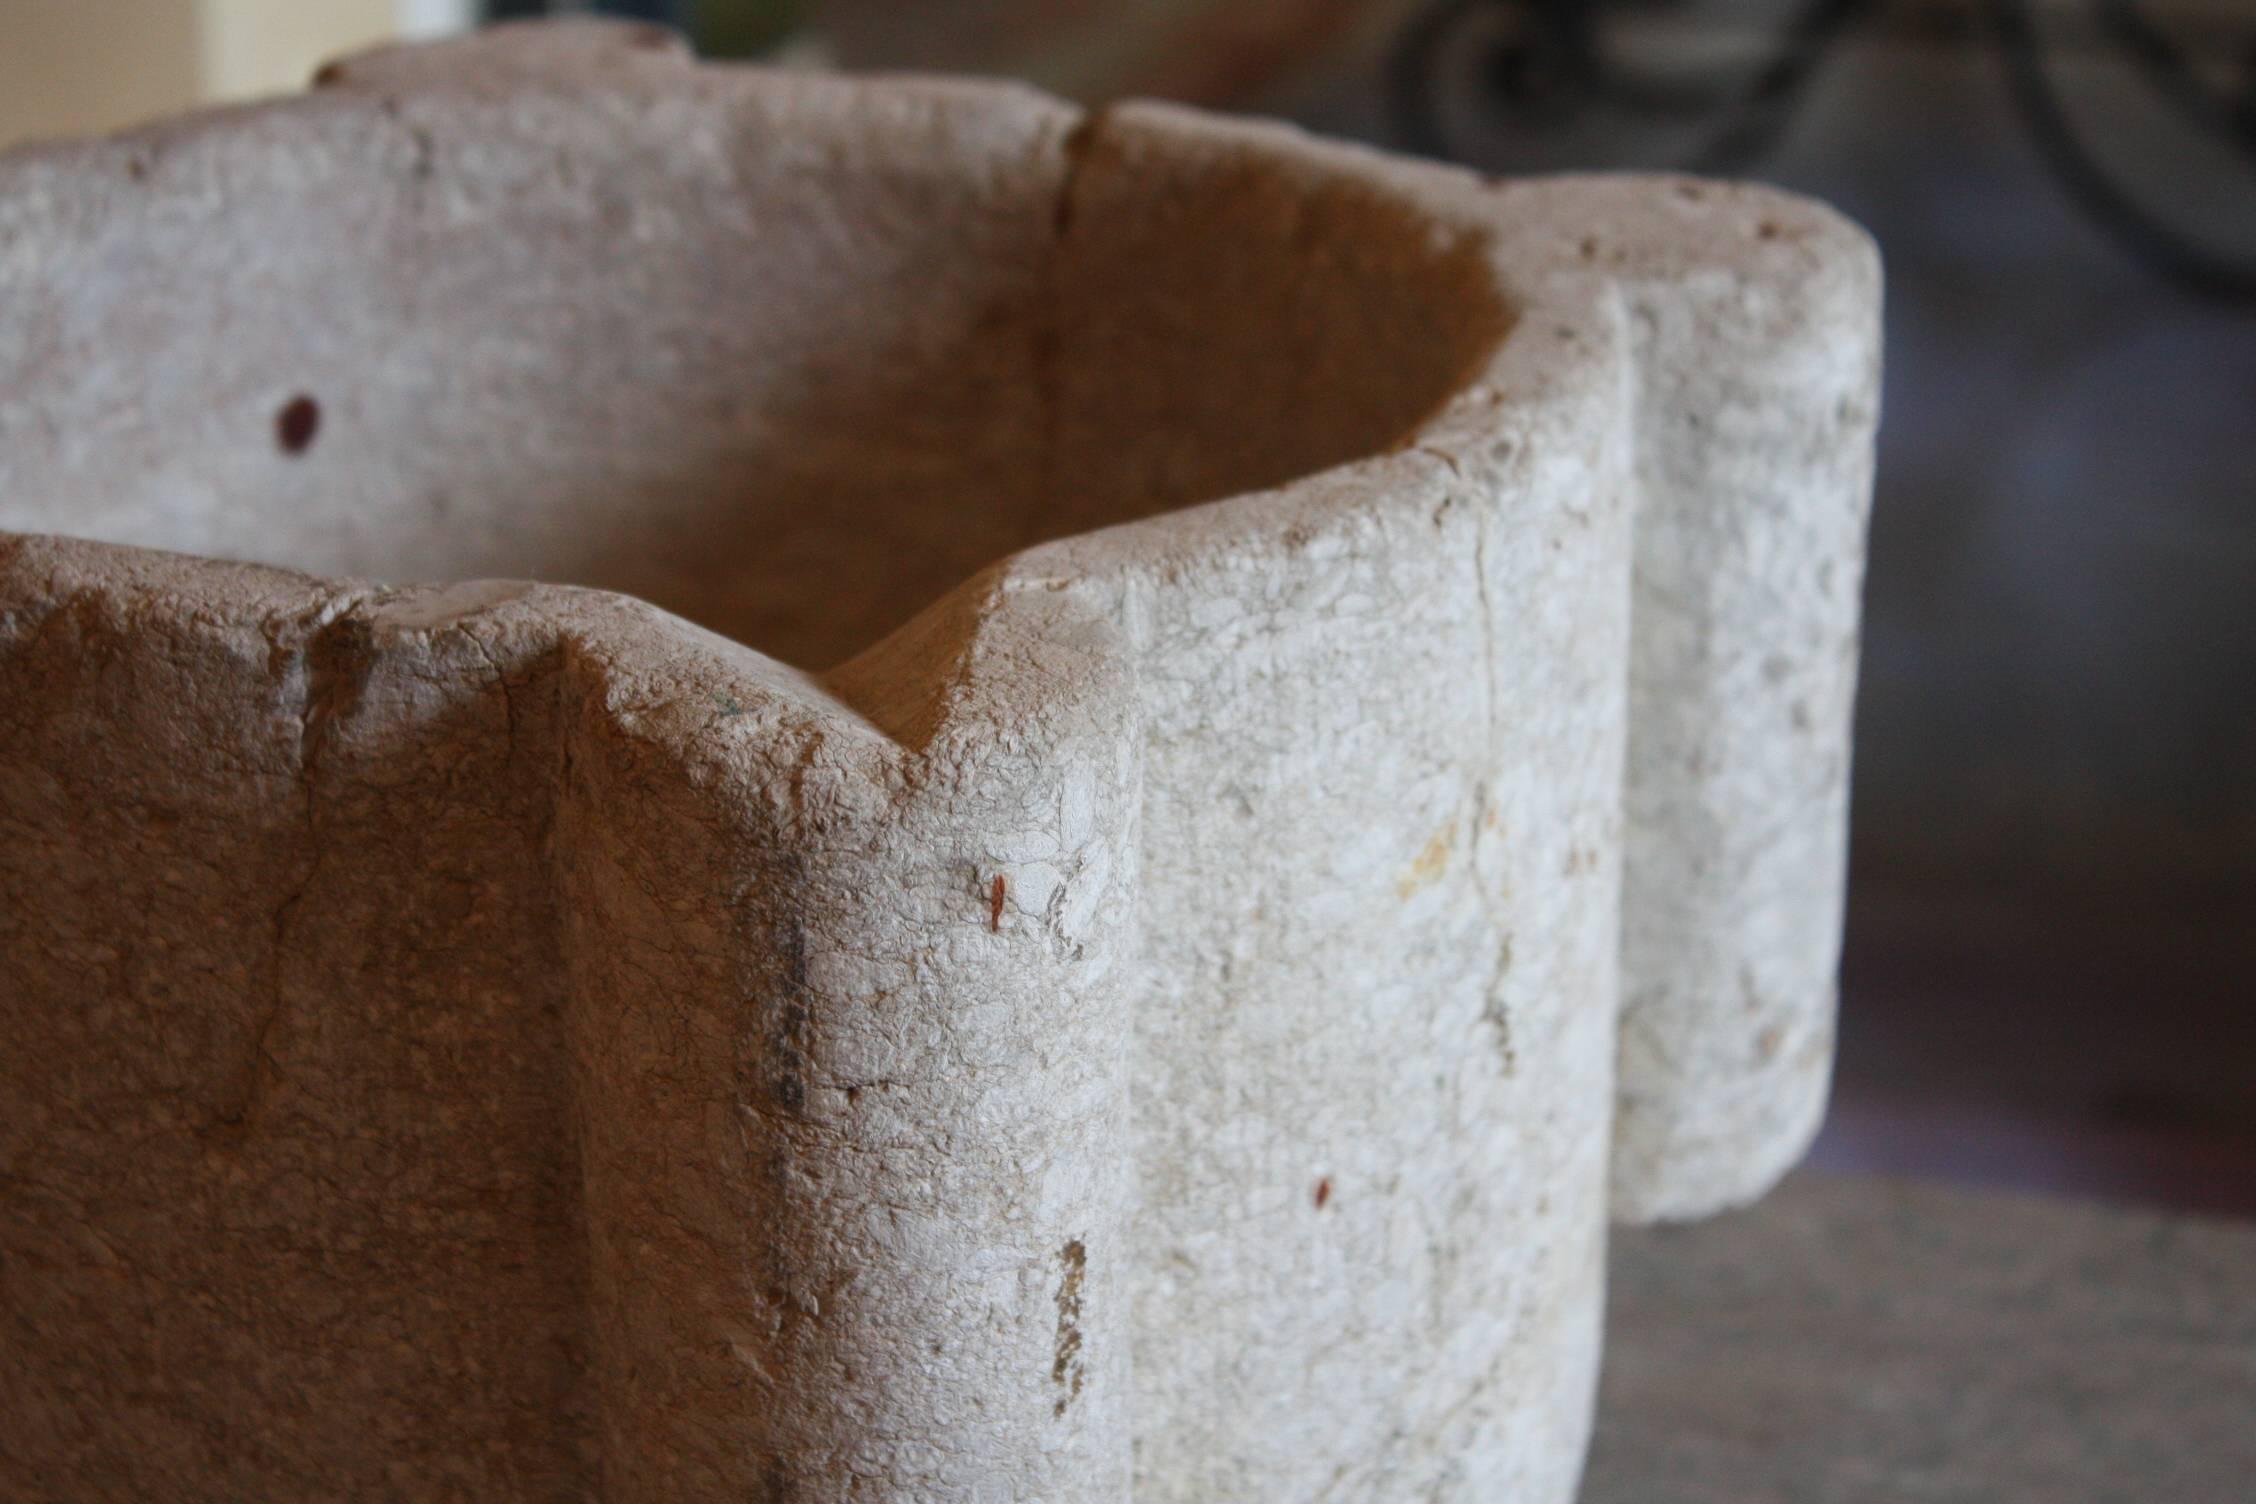 This mortar is from the countryside of France and is a great architectural element to place alone on a table or buffet.
These were used to crush herbs for medicines, paint, or mixing ingredients for food. It is solid stone/marble with a wonderful